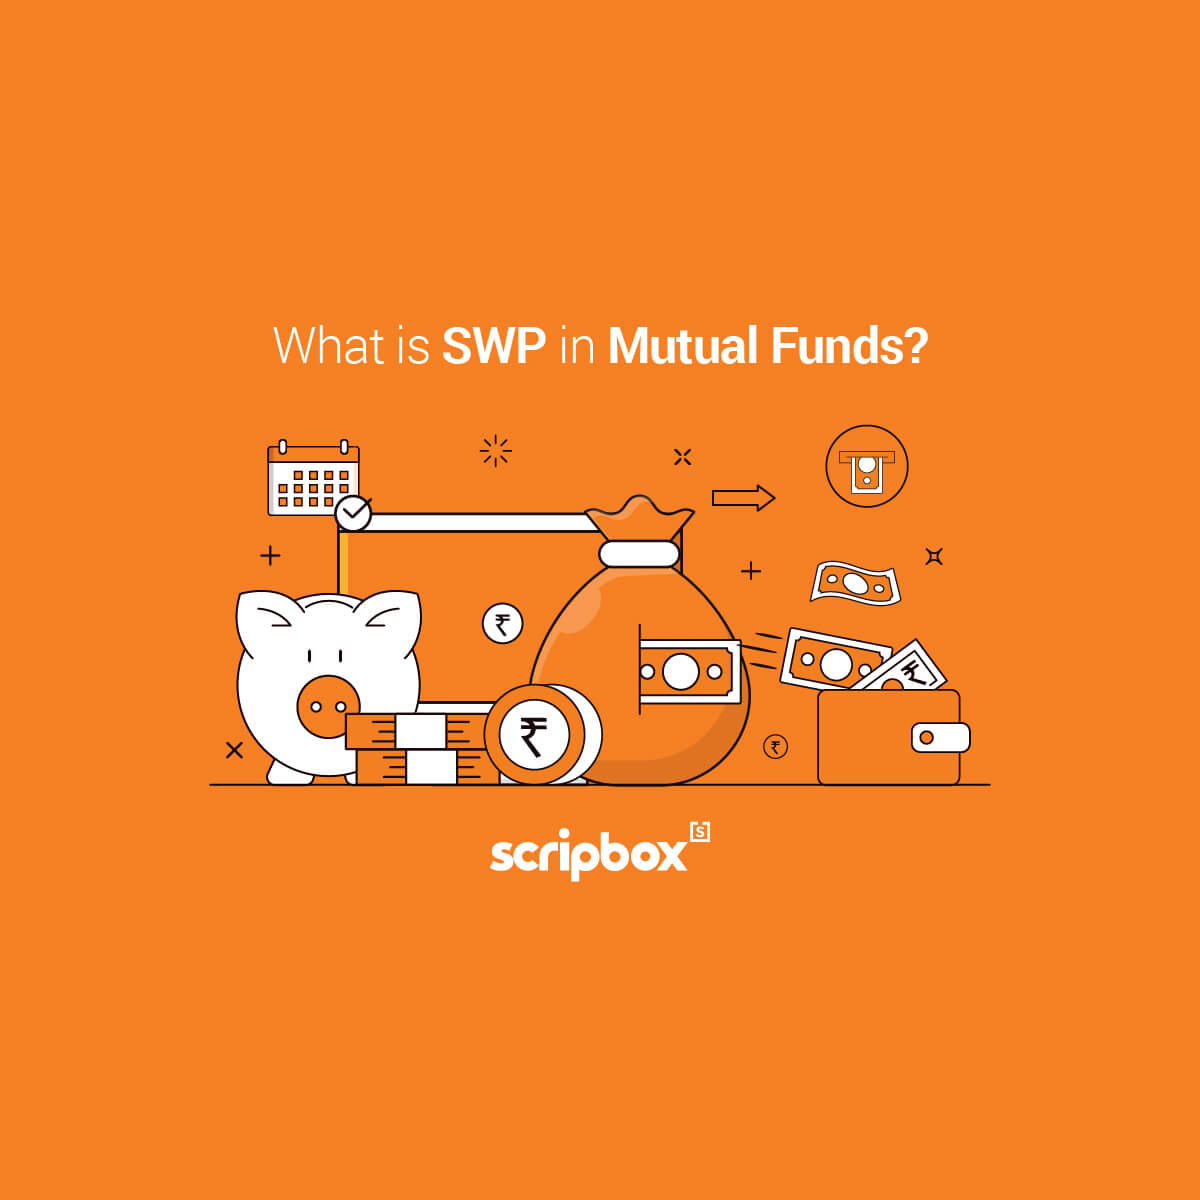 swp in mutual funds